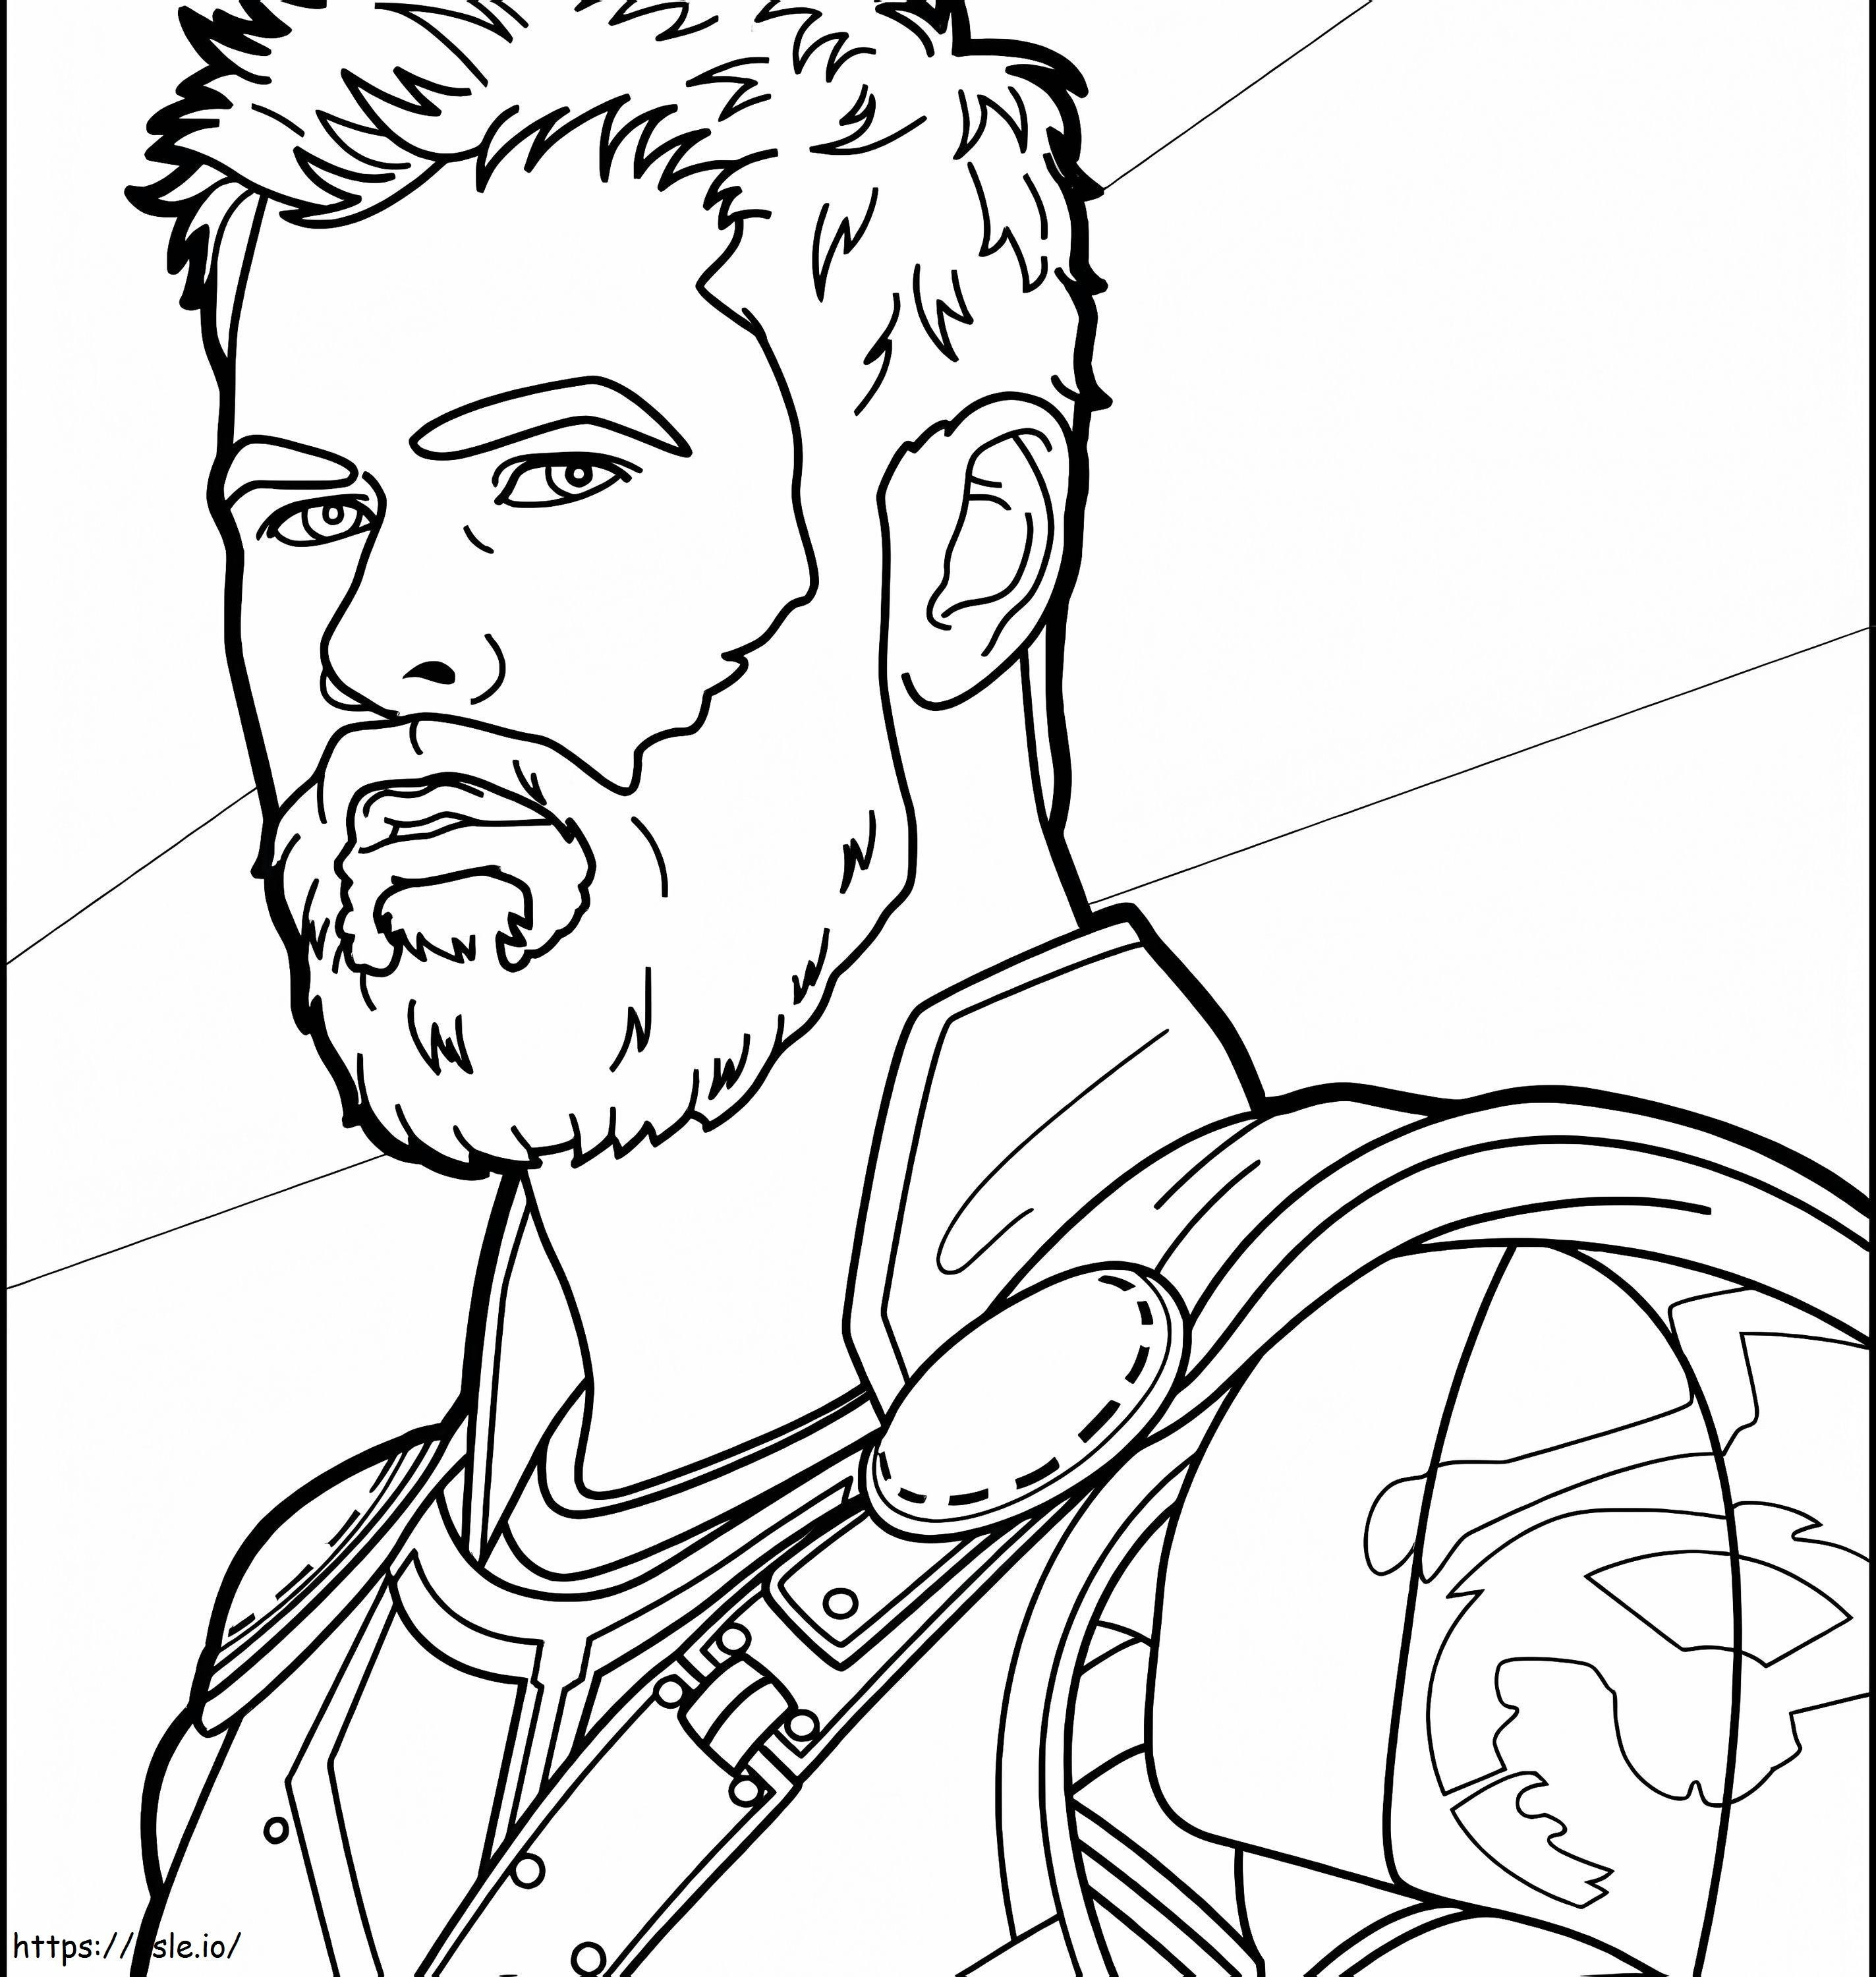 Face Thor In Thor Ragnarok coloring page